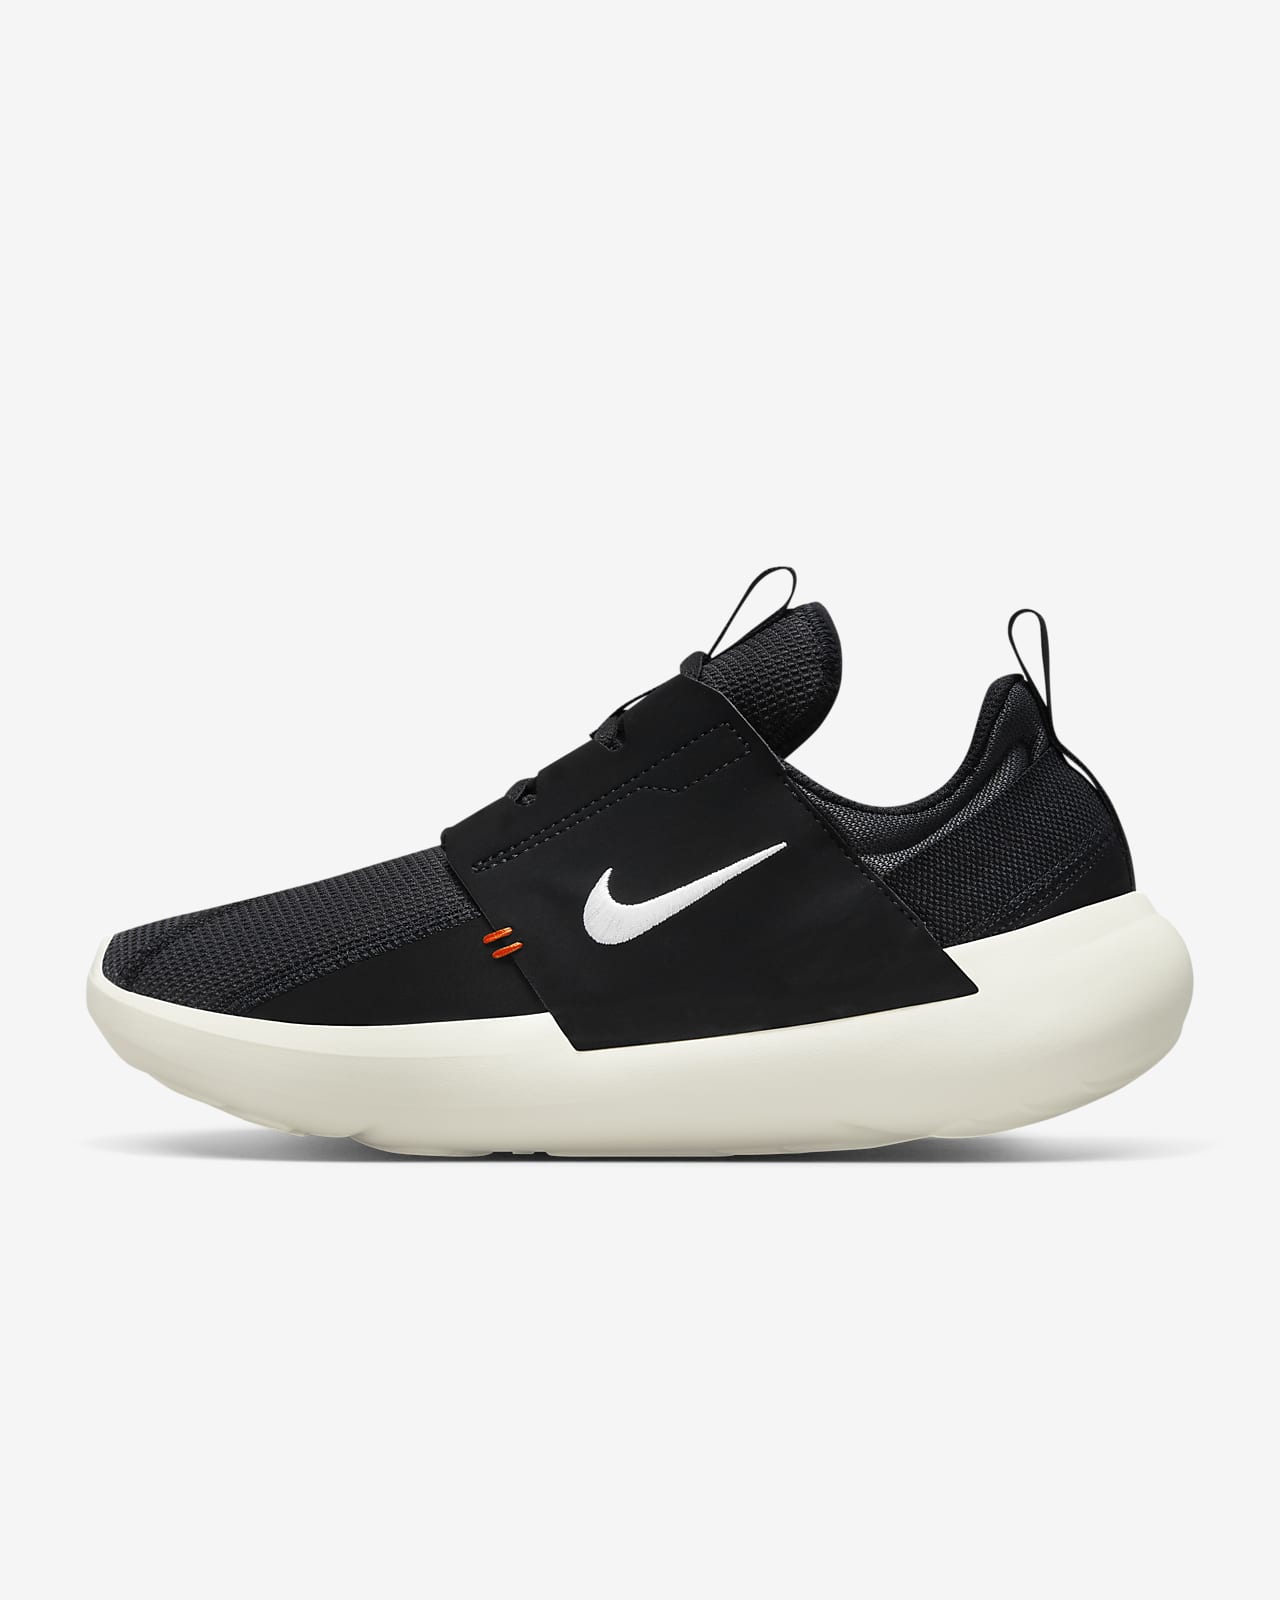 Chaussure Nike E-Series AD pour femme